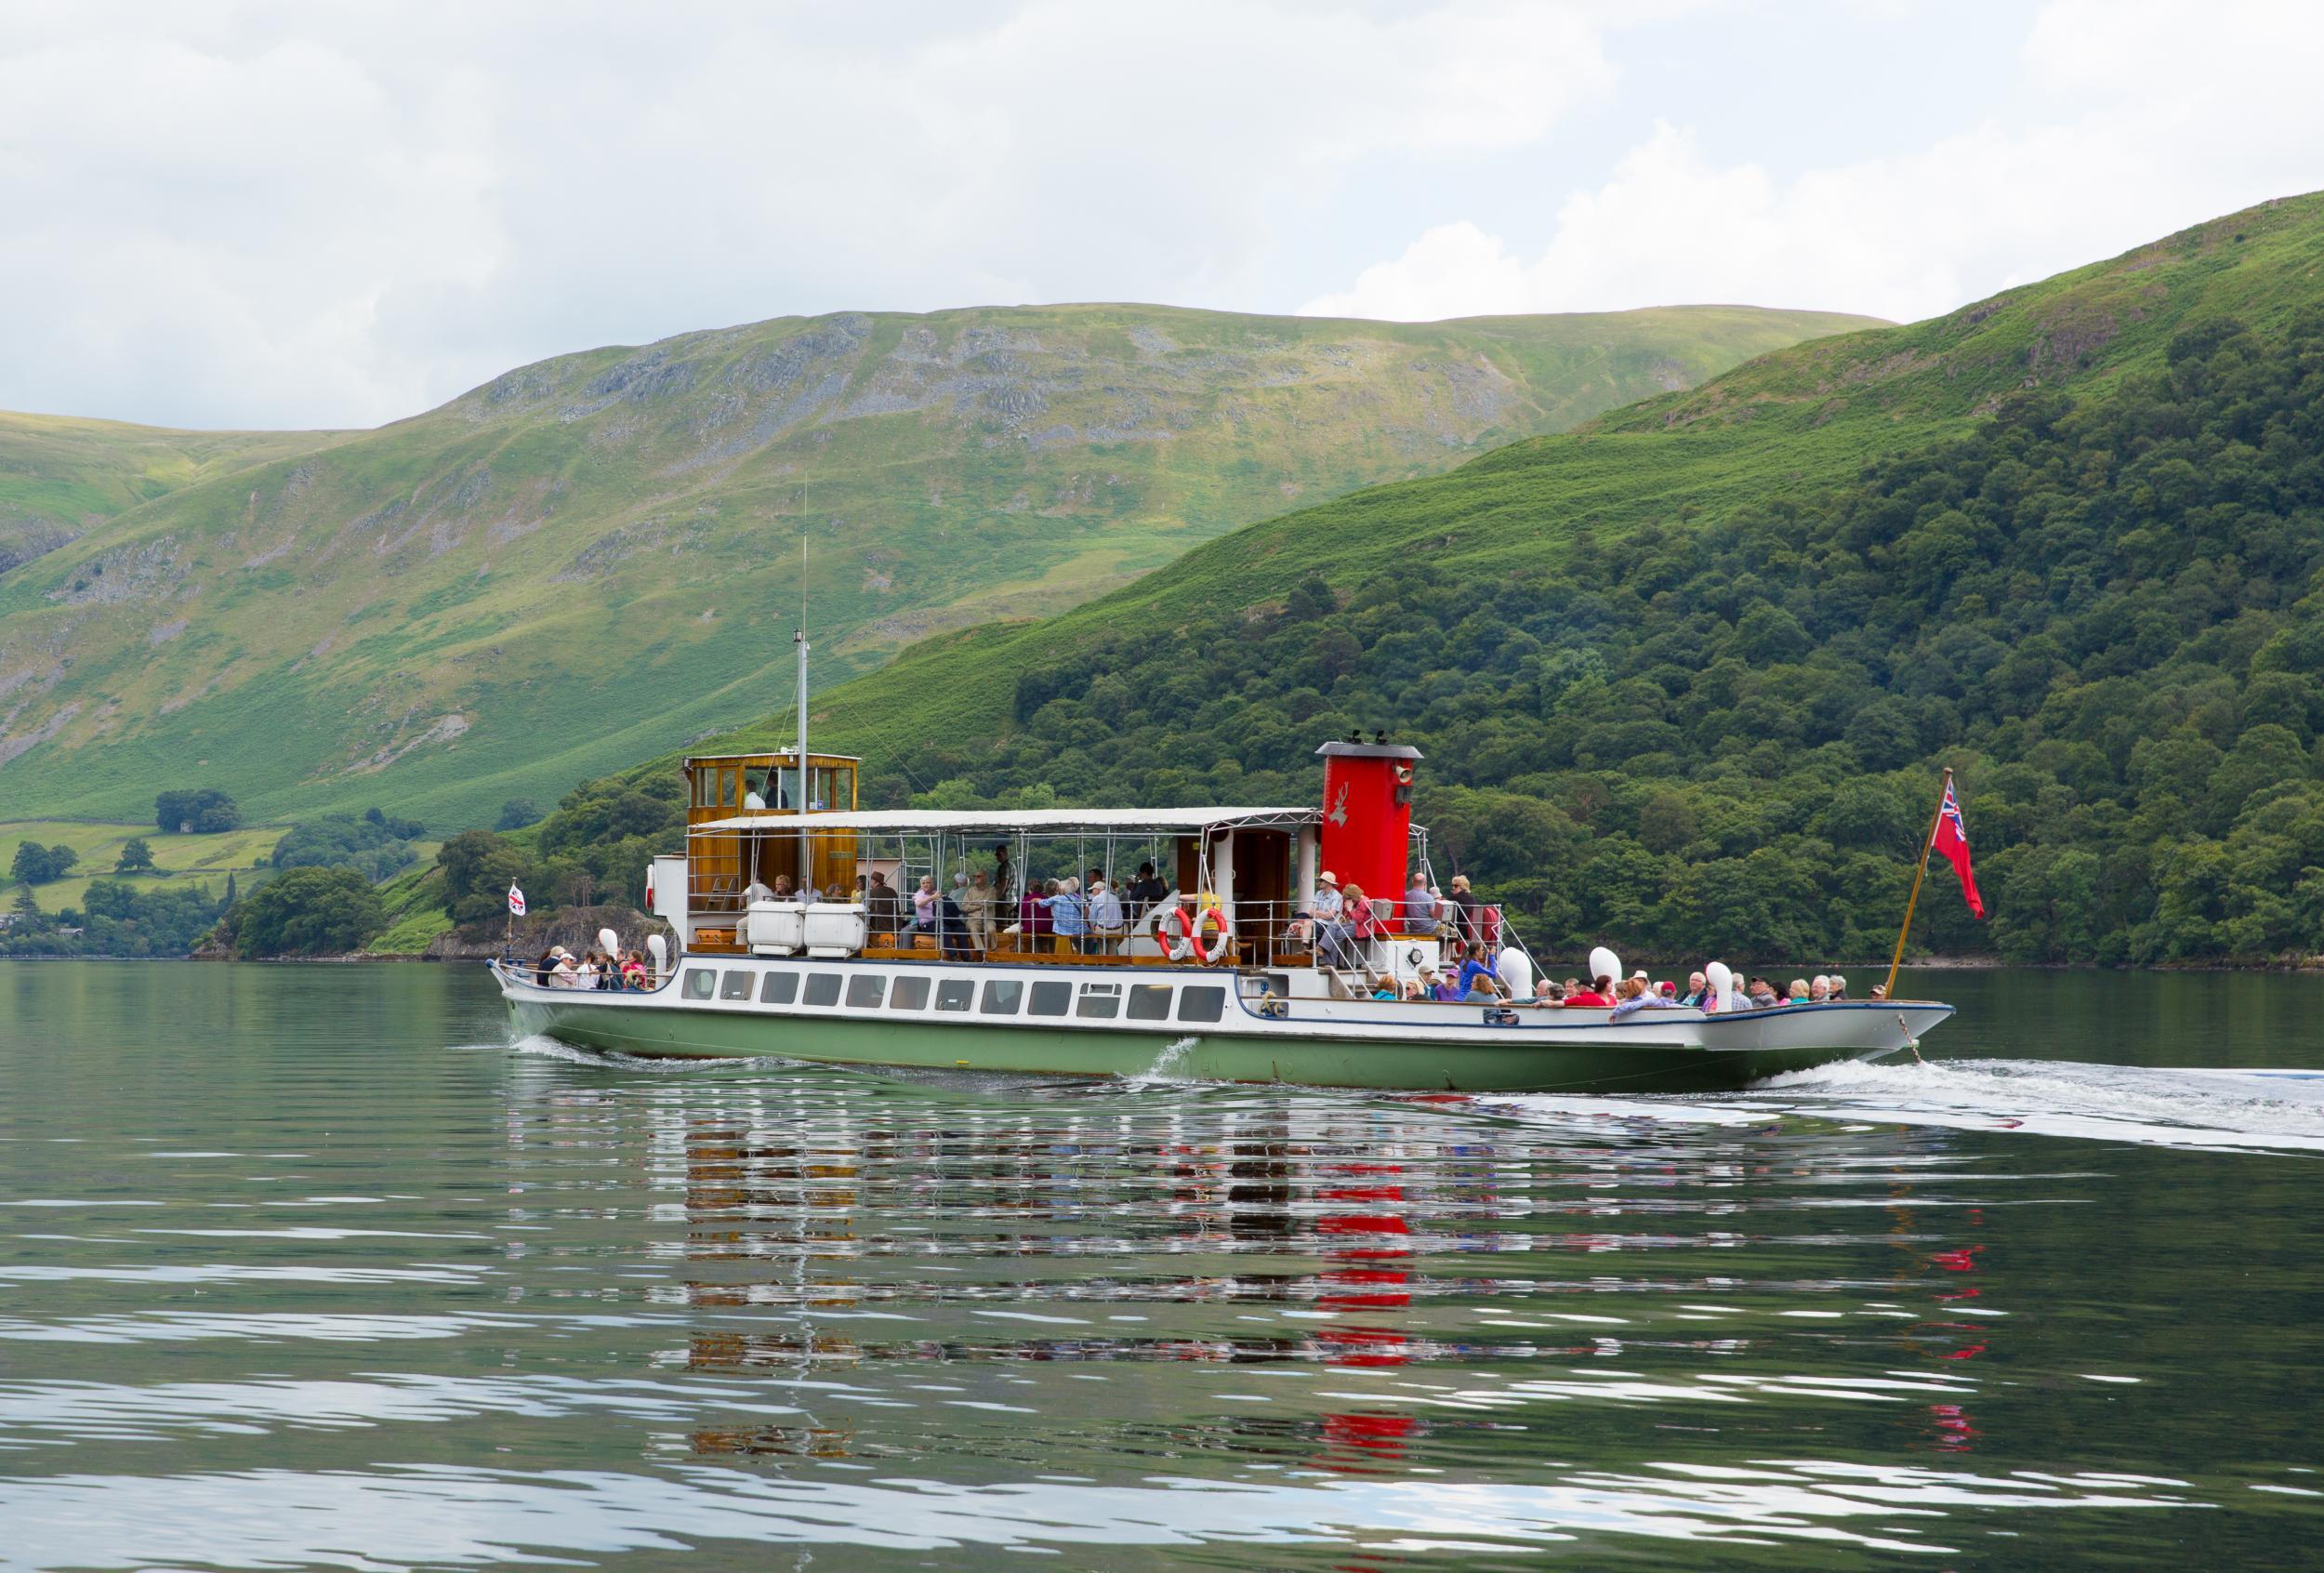 Tour the lakes on an Ullswater steamer (Mike Charles/Shutterstock)